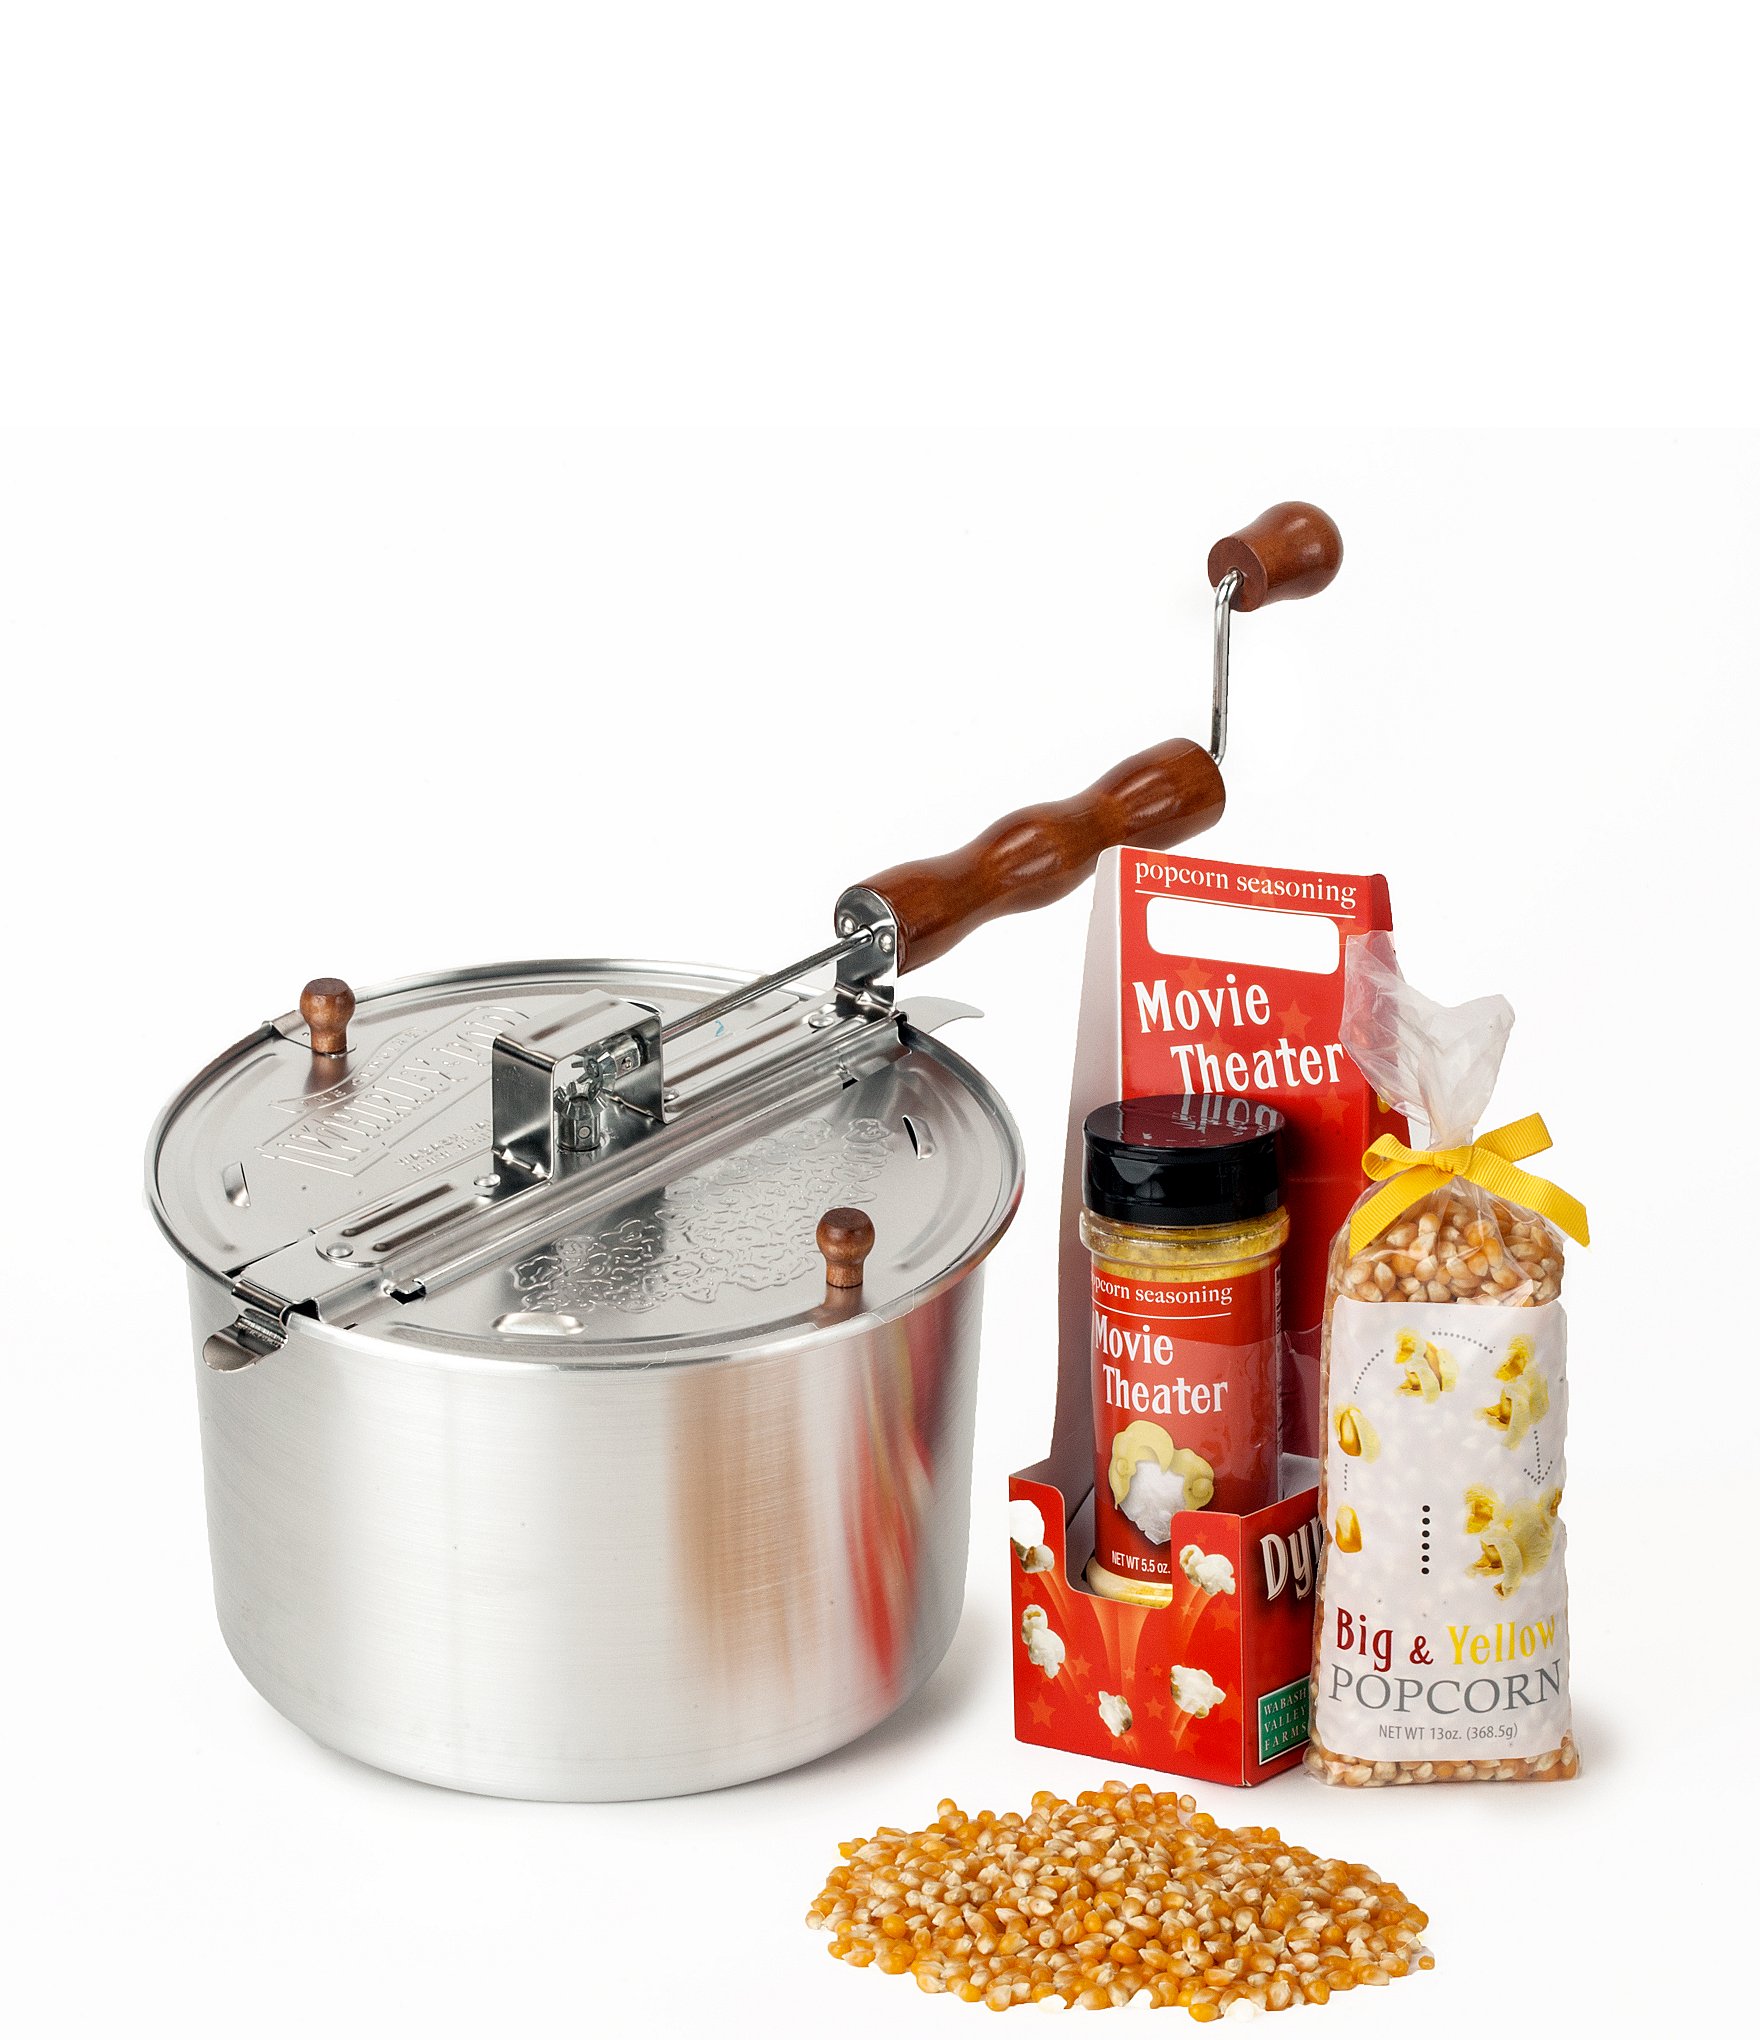 https://dimg.dillards.com/is/image/DillardsZoom/zoom/wabash-valley-farms--metal-gear-whirley-pop-popcorn-maker-and-movie-theater-combo-pack/00000000_zi_20331600.jpg